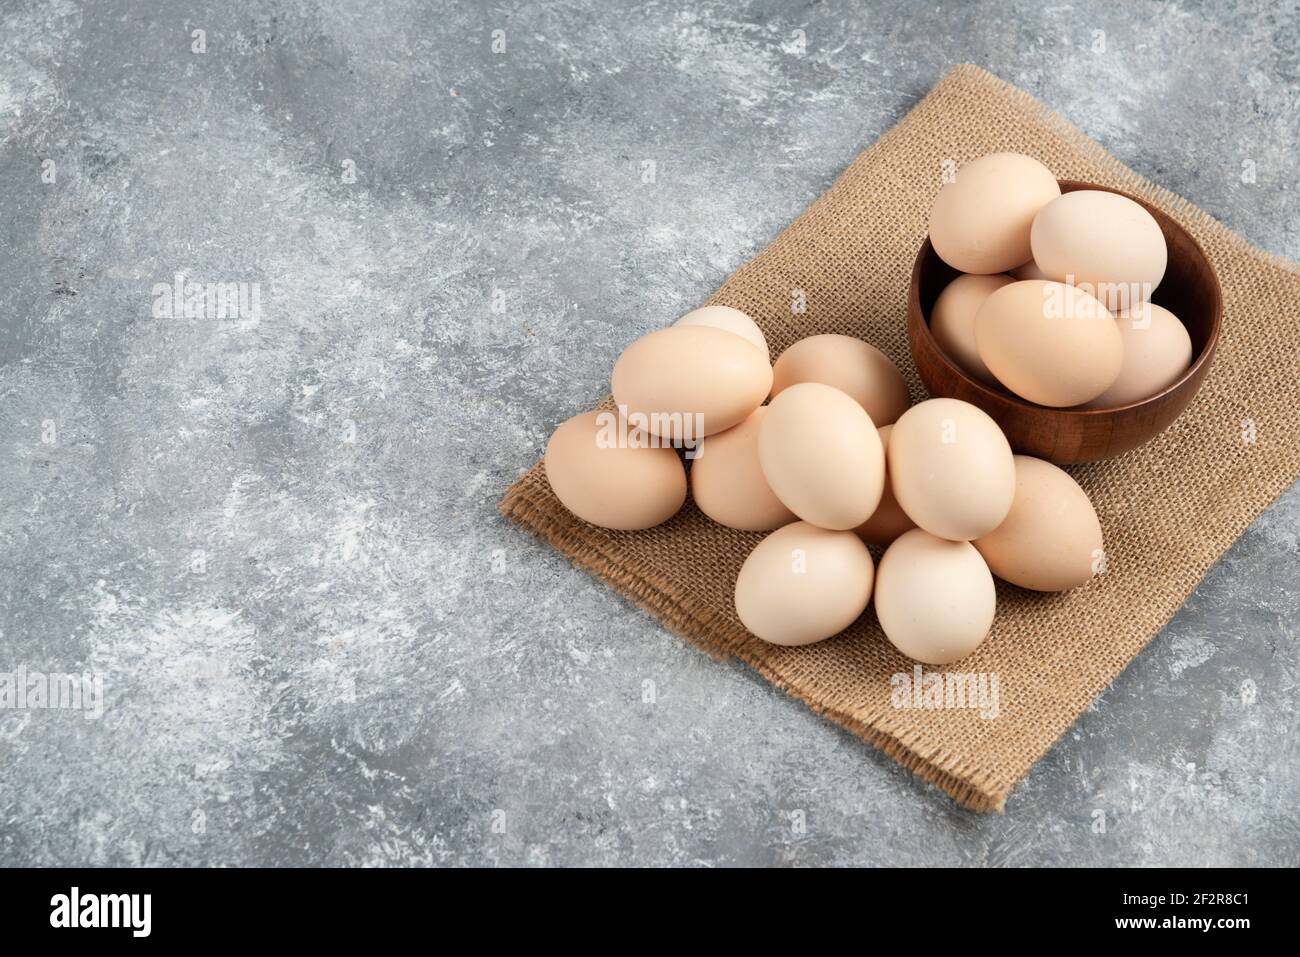 Wooden bowl of organic raw eggs on marble surface Stock Photo